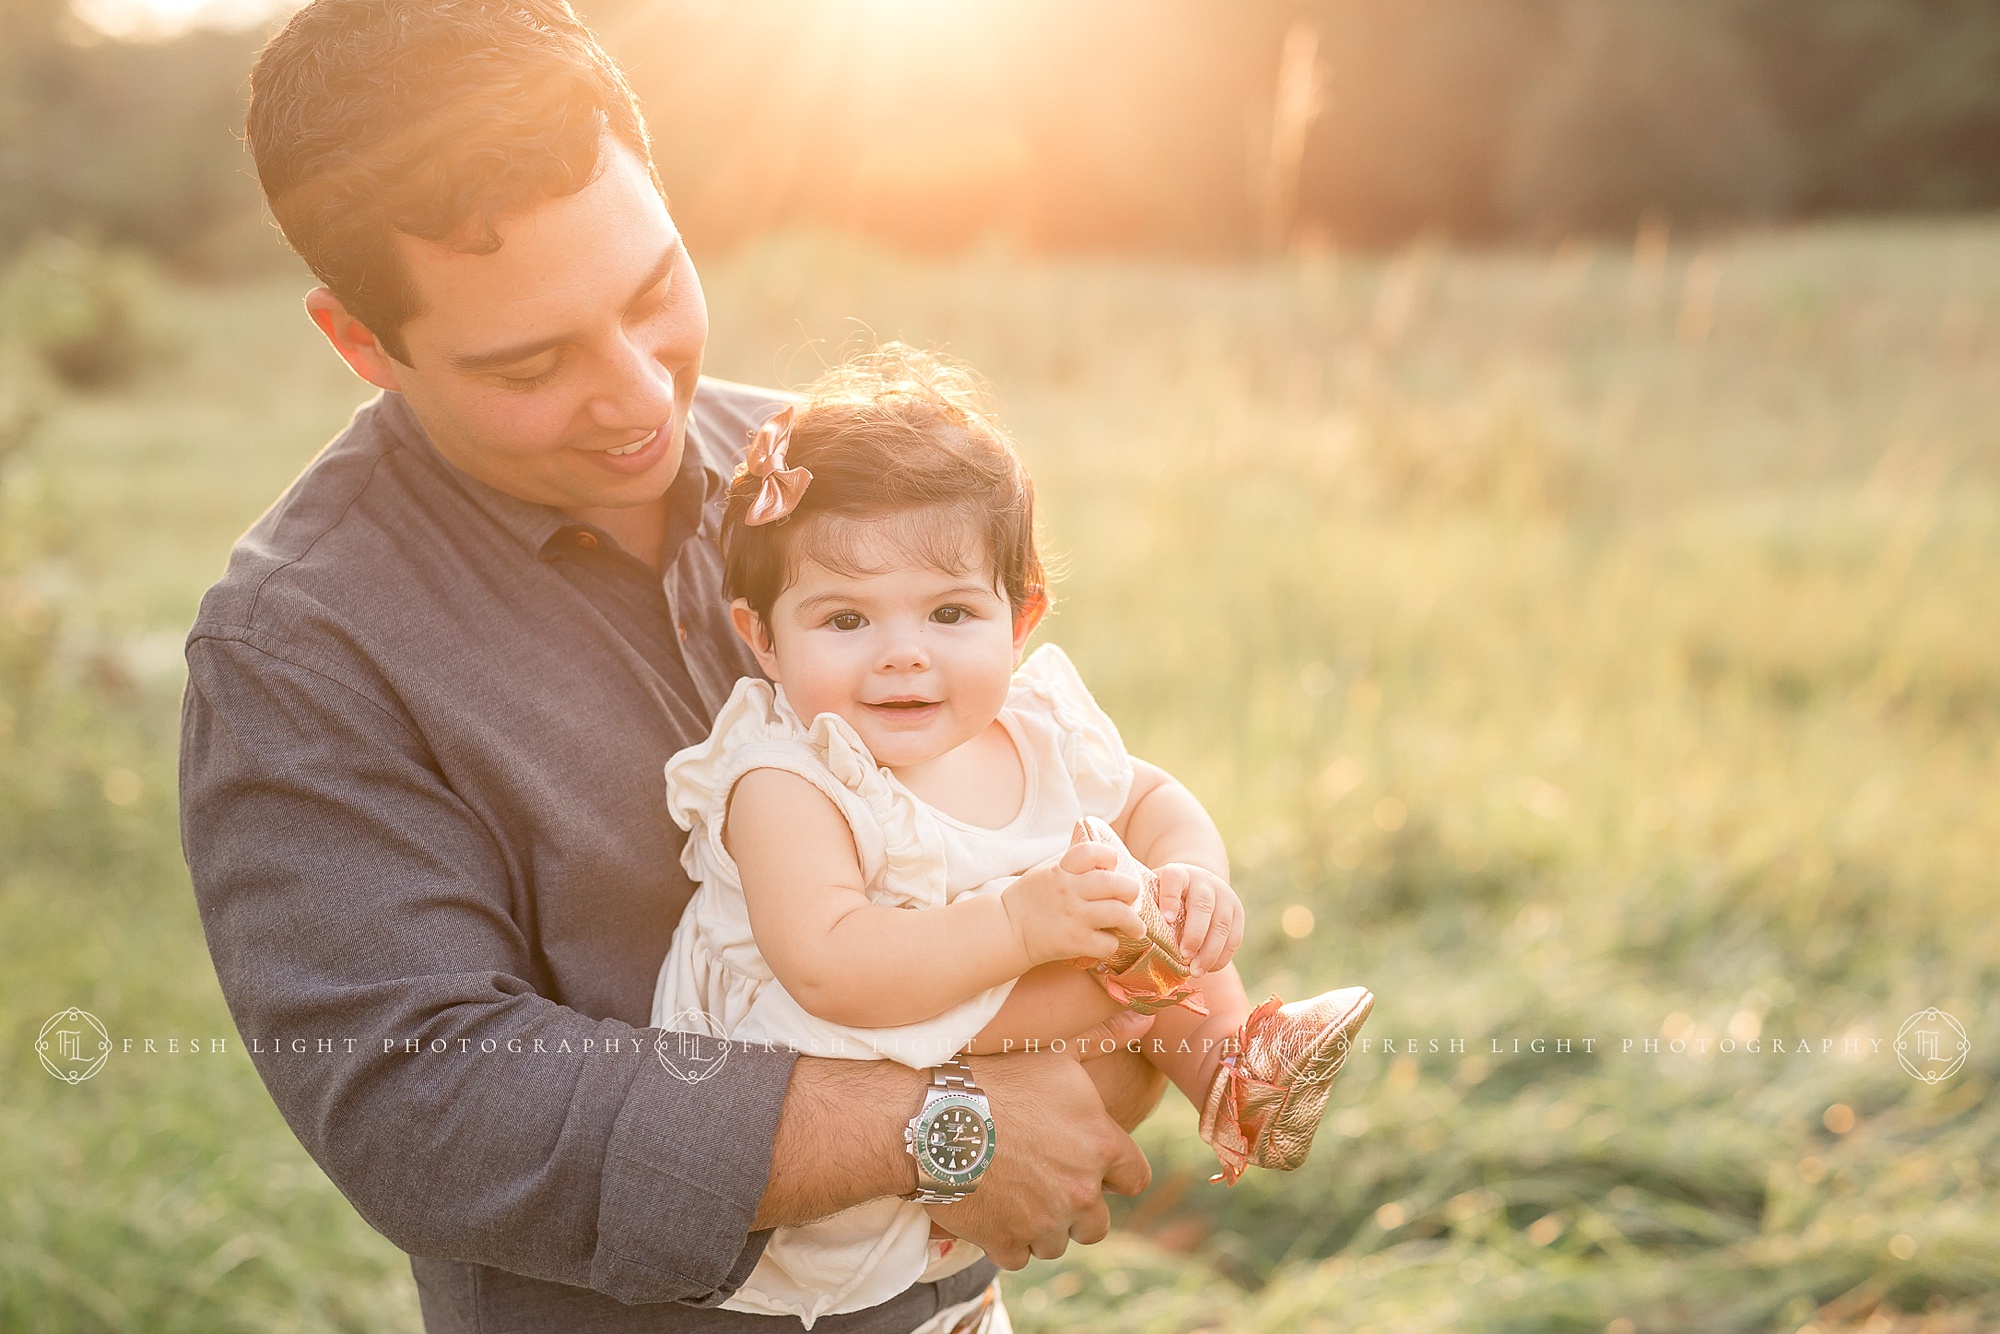 Dad holding daughter in outdoor setting